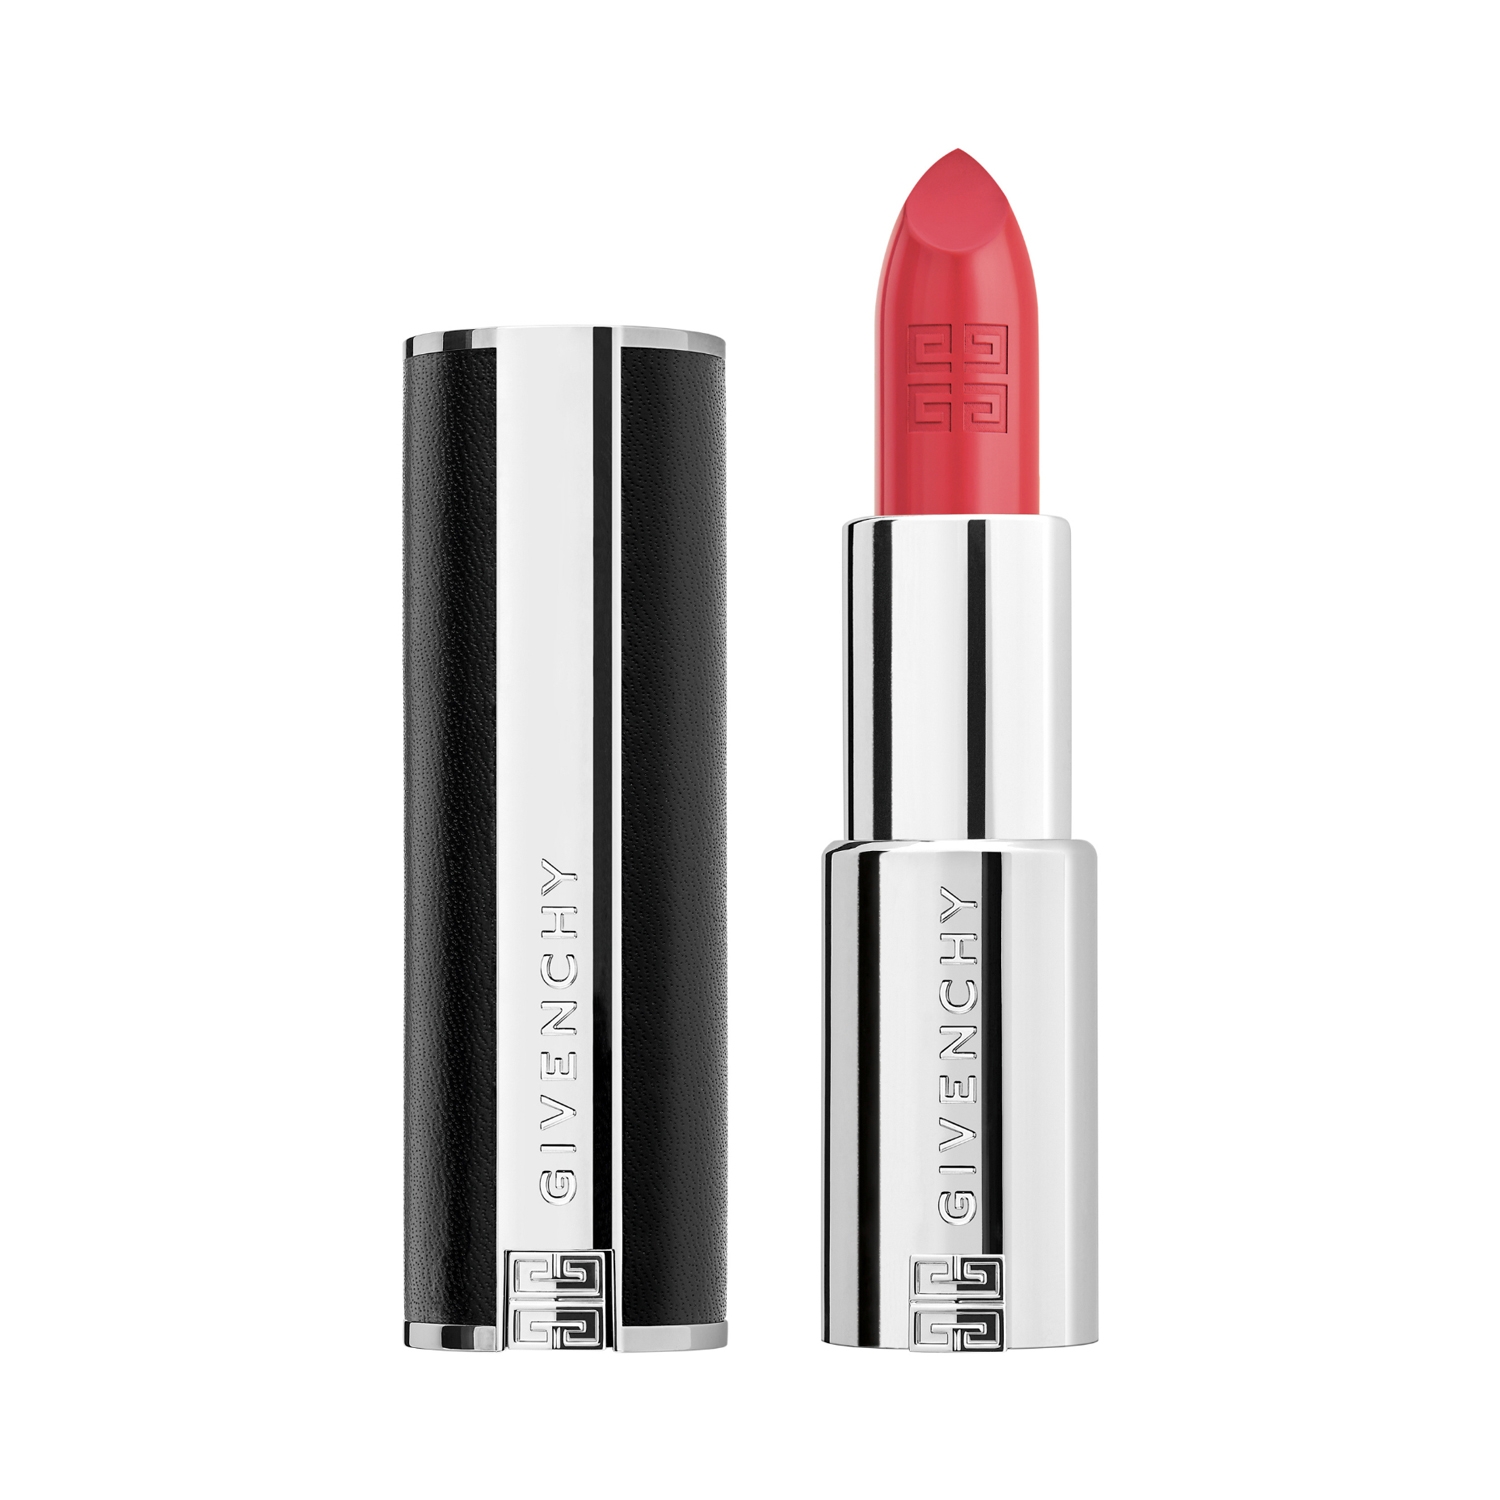 Givenchy | Givenchy Le Rouge Interdit Intense Silk Lipstick - N 223 Rose Irresistible (3.4g)